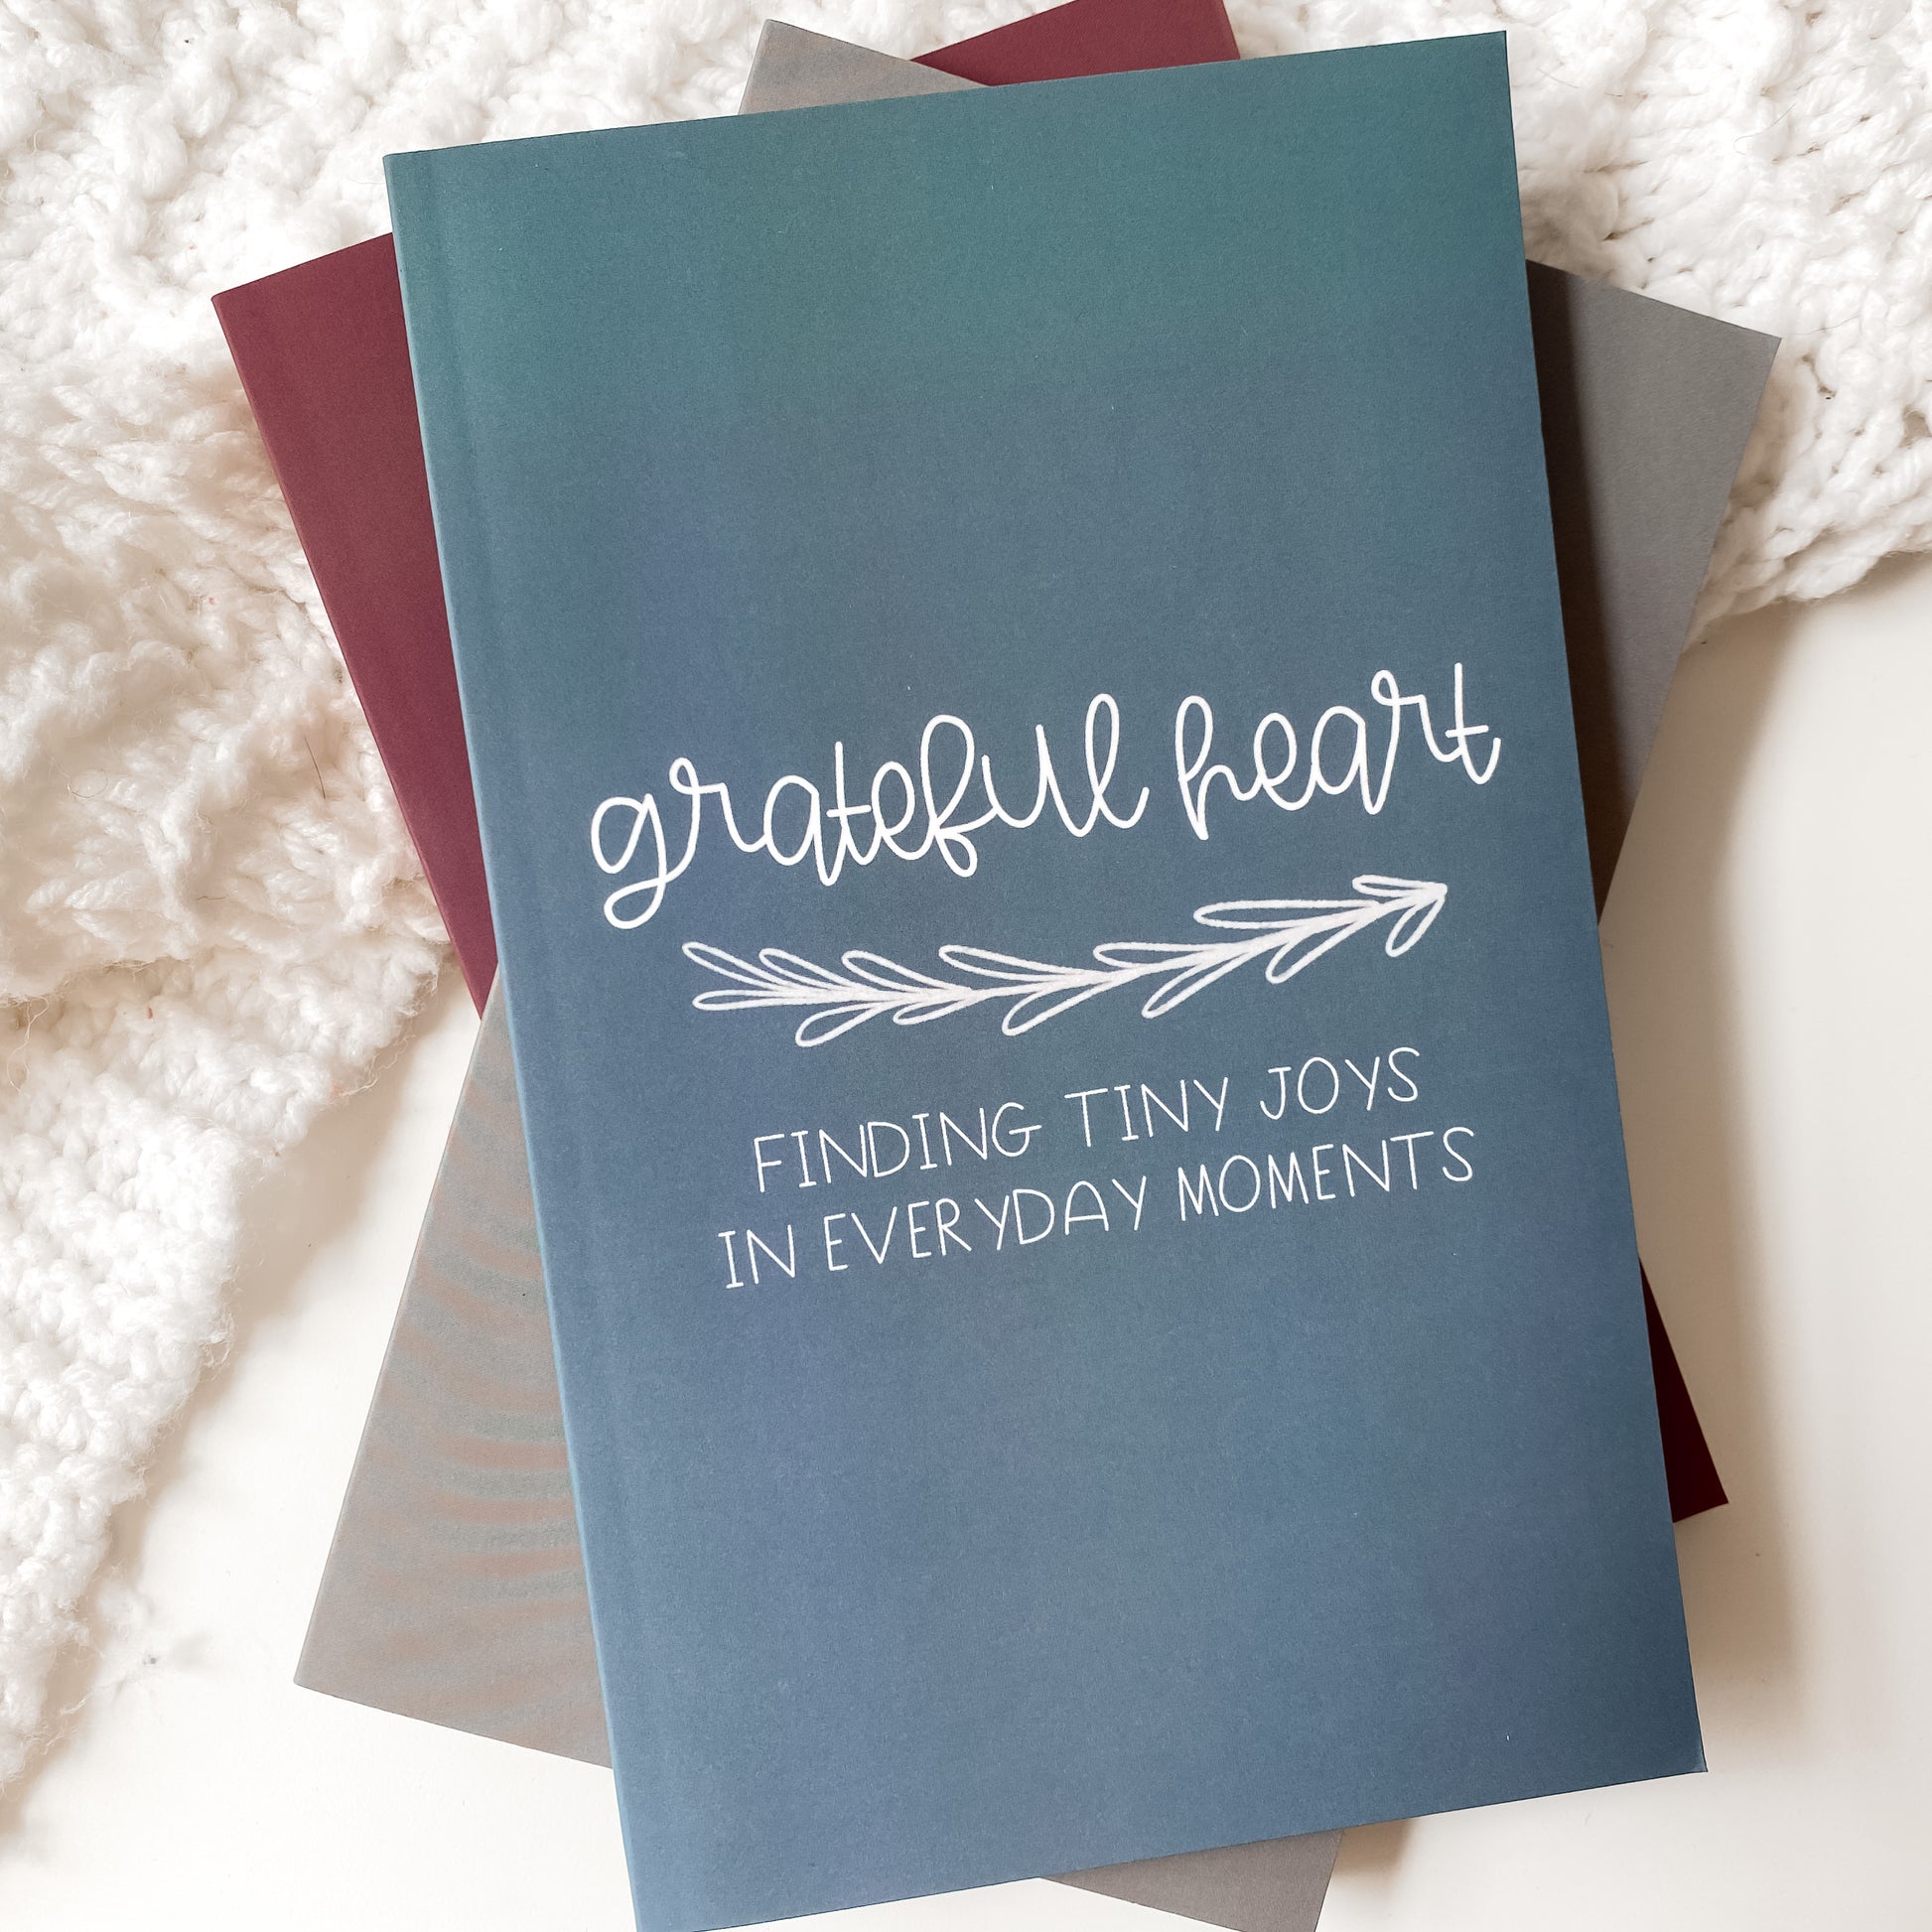 Blue gratitude journal titled Grateful Heart Finding Tiny Joys in Everyday Moments